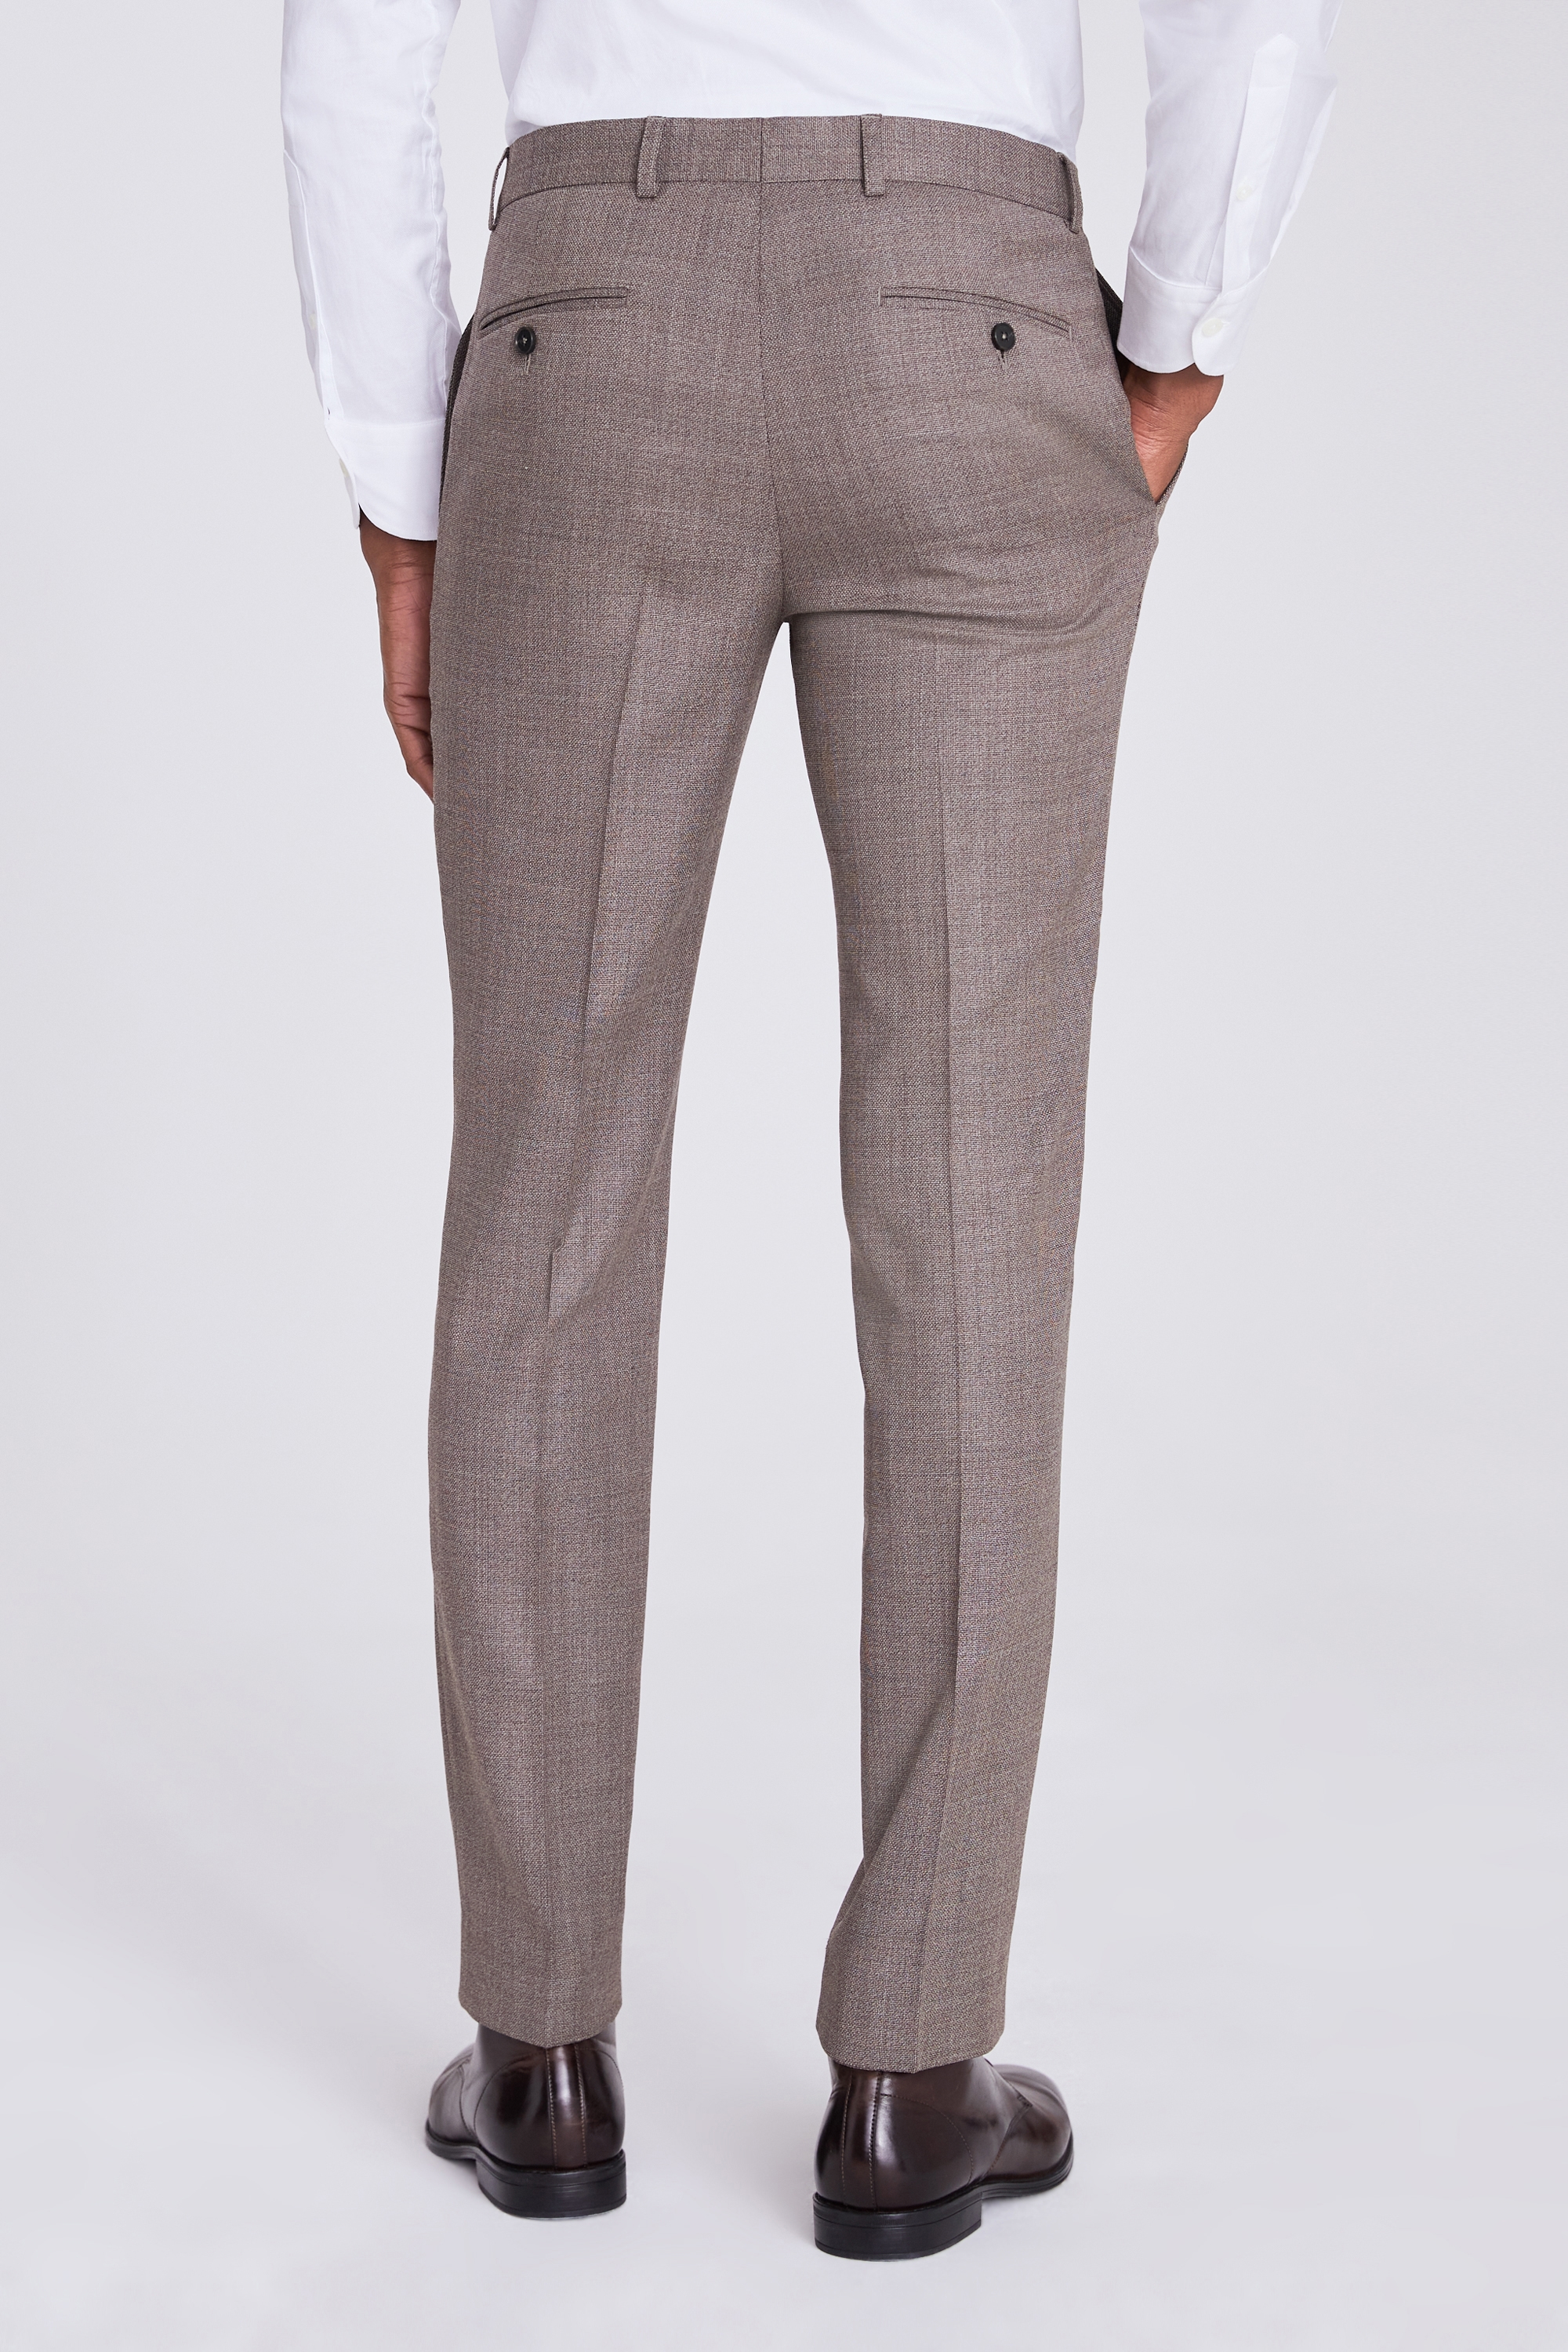 Italian Slim Fit Taupe Hopsack Trousers | Buy Online at Moss